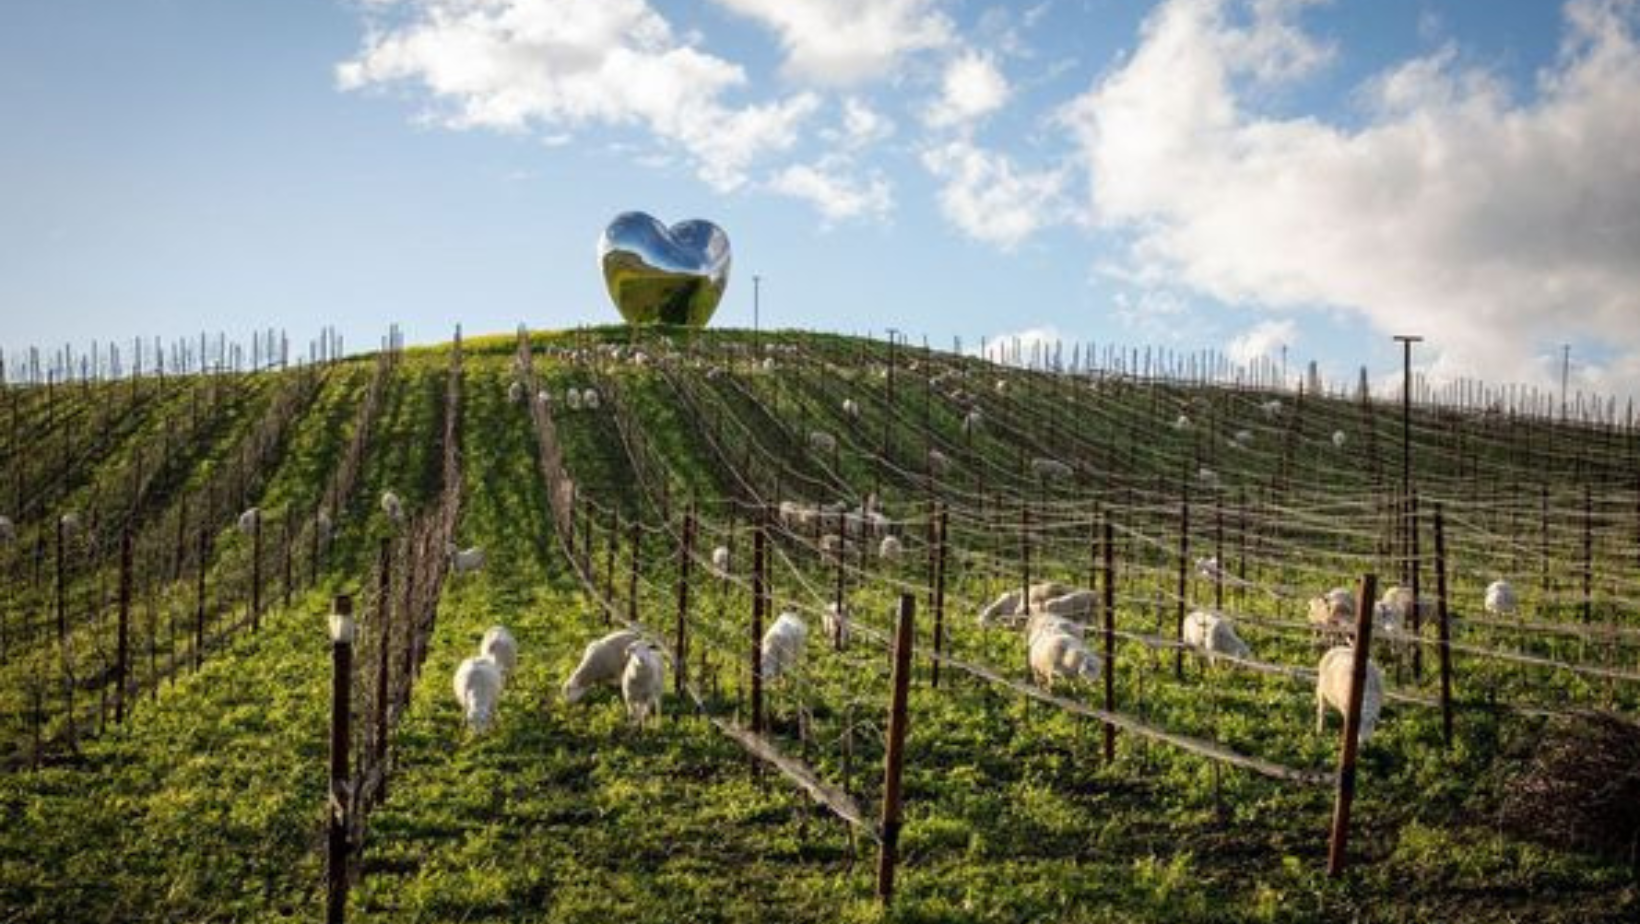 Vineyards on a hill with sheep grazing between the rows and a large mirrored sculpture of a heart at the top of the hill.